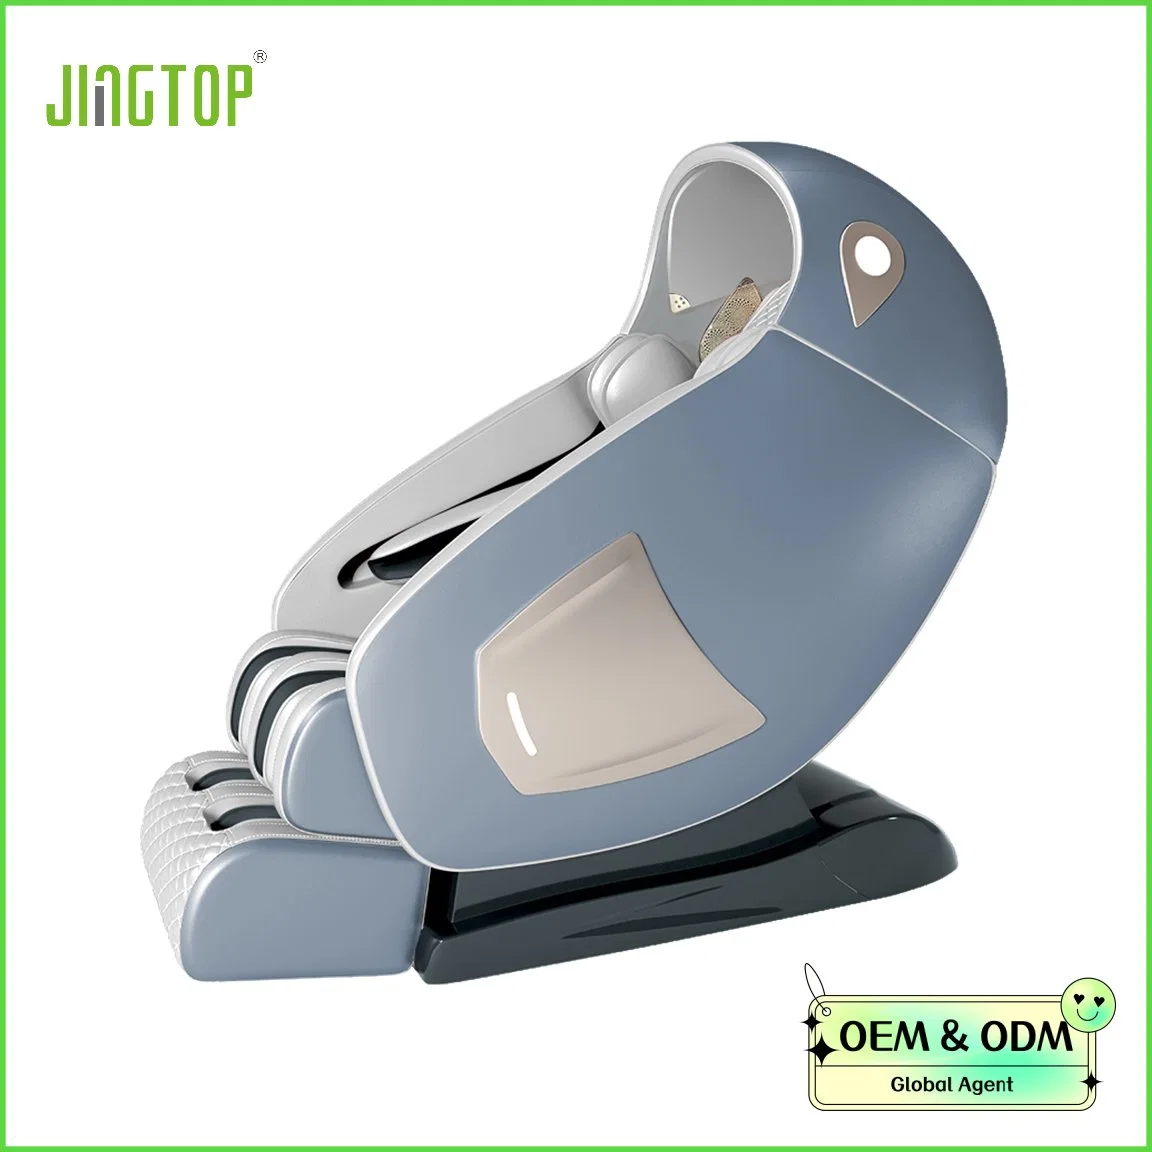 Jingtop Exclusive Agent Top Selling Foot Roller Heating Therapy Massage Office Chair